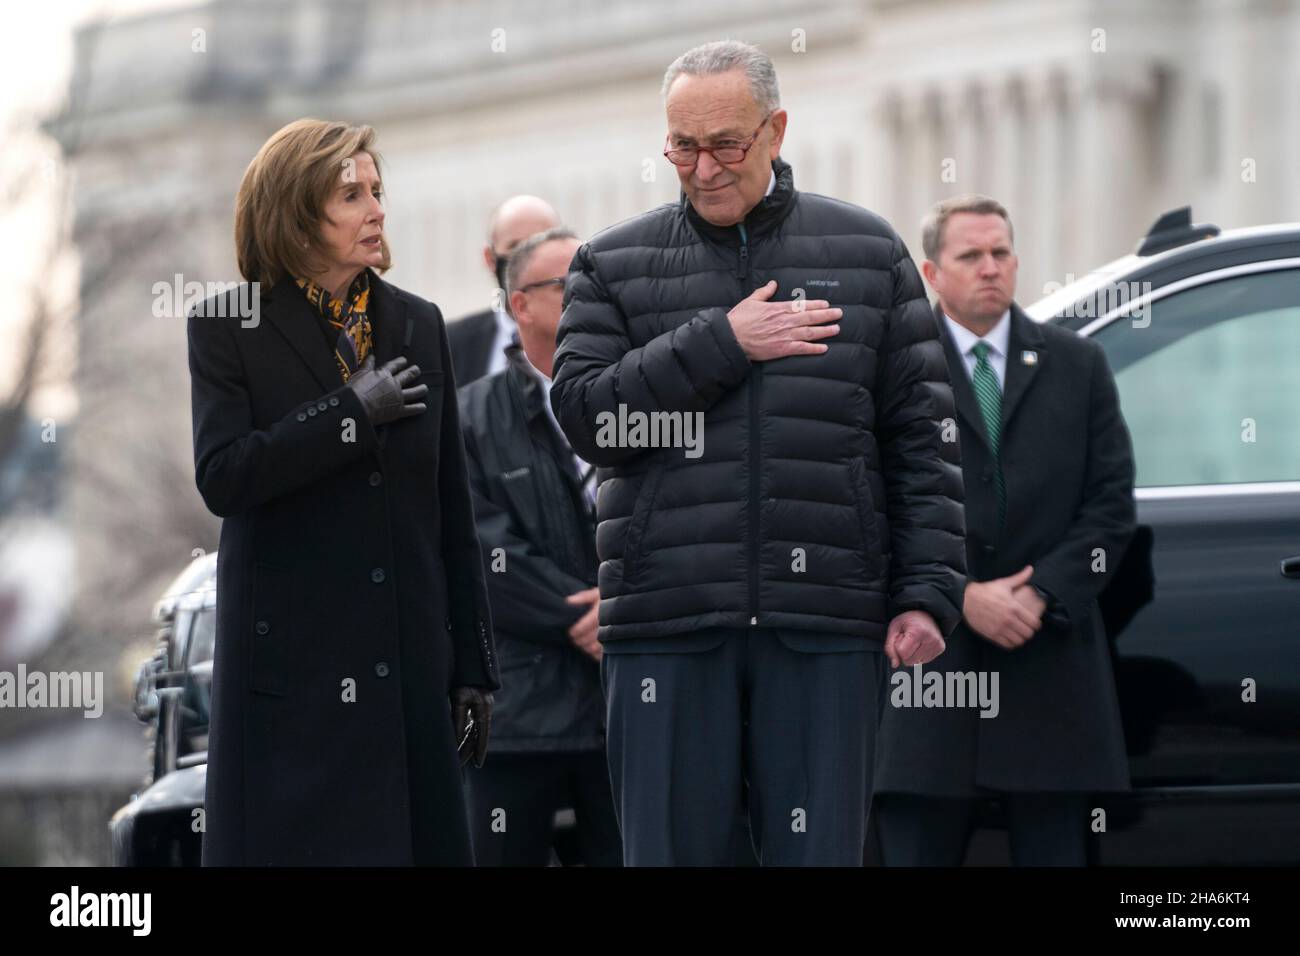 Washington, DC. 10th Dec, 2021. Speaker Nancy Pelosi (D-Calif.) and House Majority Leader Charles Schumer (D-N.Y.) watch a military honor guard carries the casket of Sen. Bob Dole (R-Kan.) after lying in state at the U.S. Capitol in Washington, DC, on Friday, December 10, 2021. Dole will be taken to Washington National Cathedral for a funeral service. Credit: Greg Nash/Pool via CNP/dpa/Alamy Live News Stock Photo